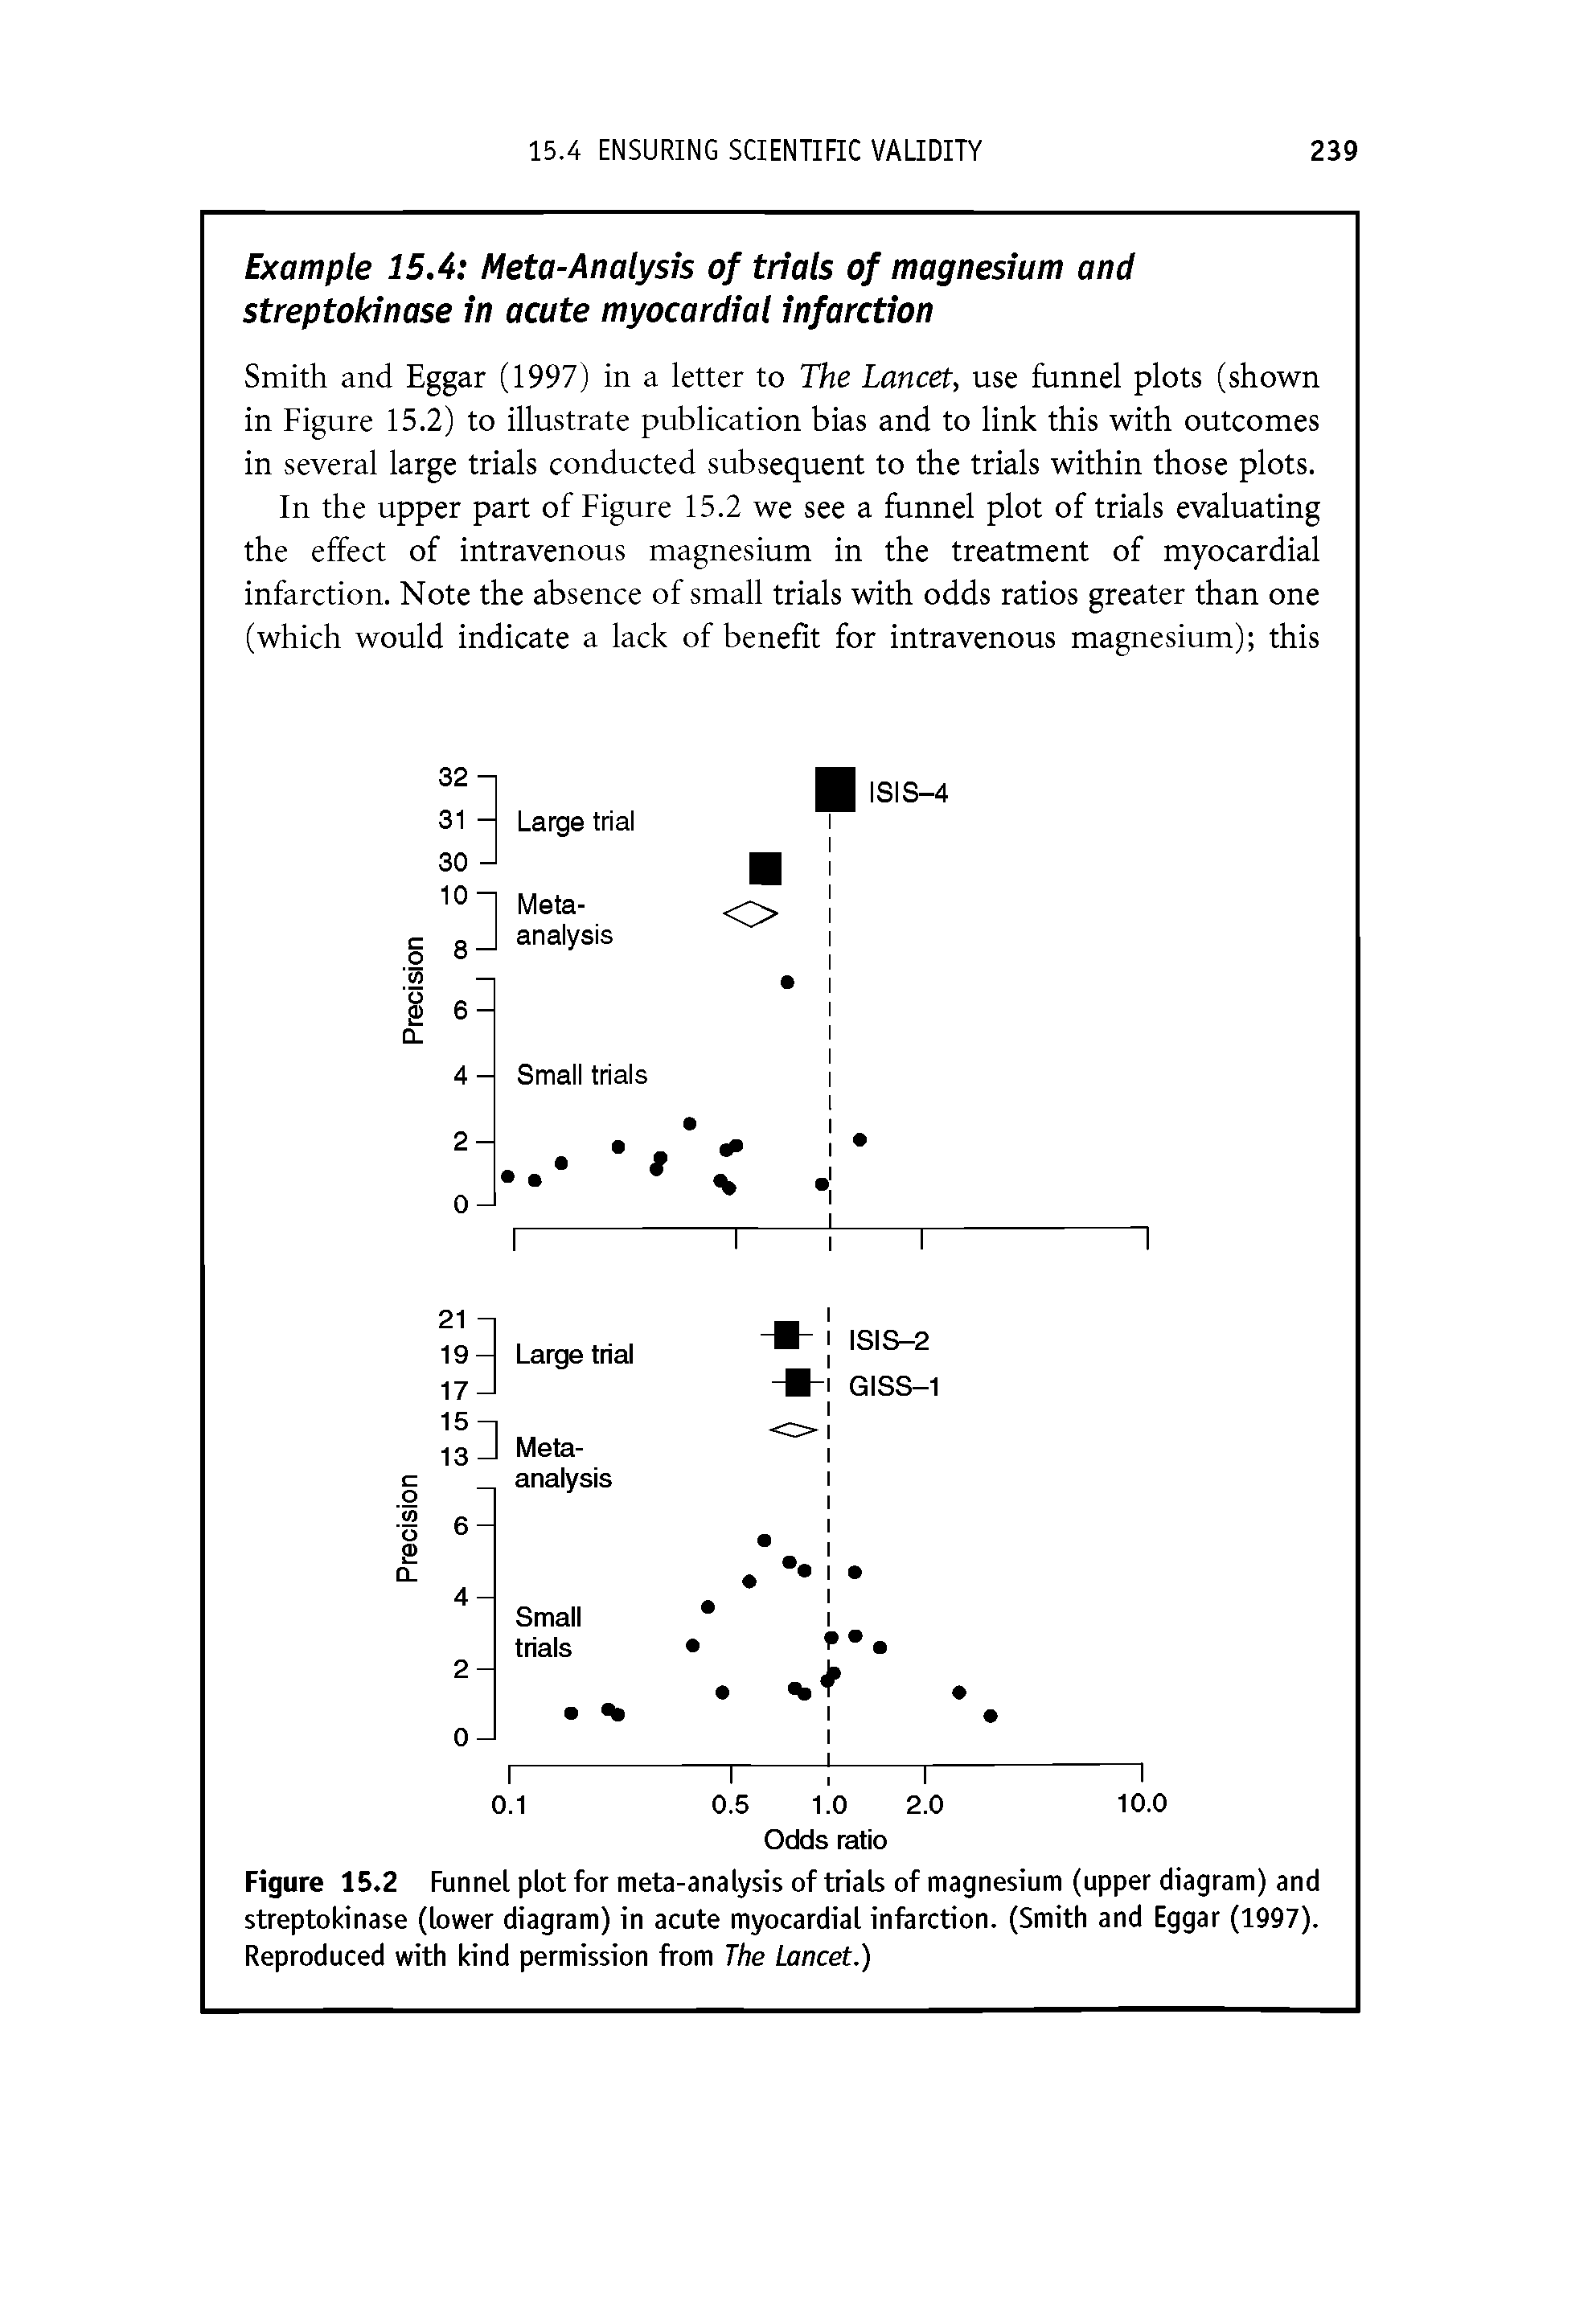 Figure 15.2 Funnel plot for meta-analysis of trials of magnesium (upper diagram) and streptokinase (lower diagram) in acute myocardial infarction. (Smith and Eggar (1997). Reproduced with kind permission from The Lancet.)...